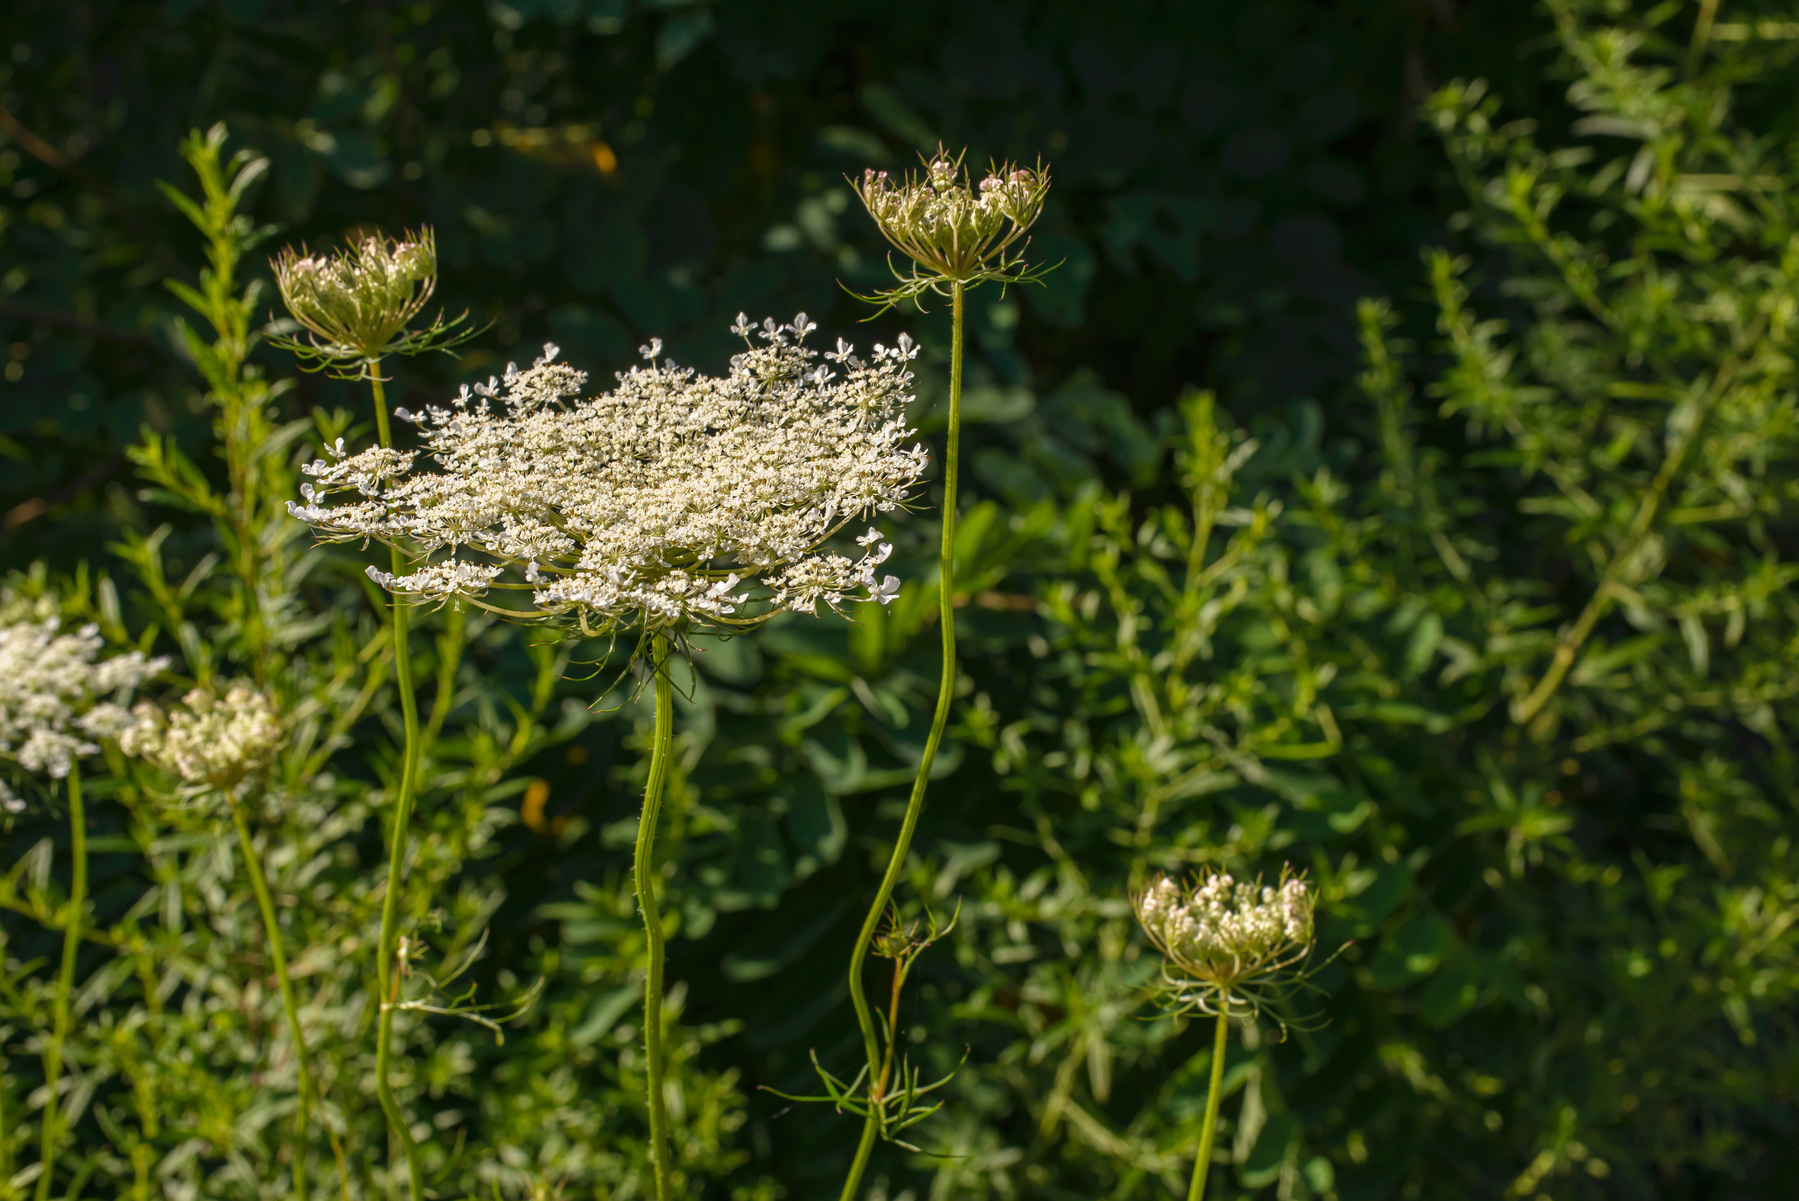 Queen Anne’s lace bloom in the sunlight with additional blooms and foliage in the background